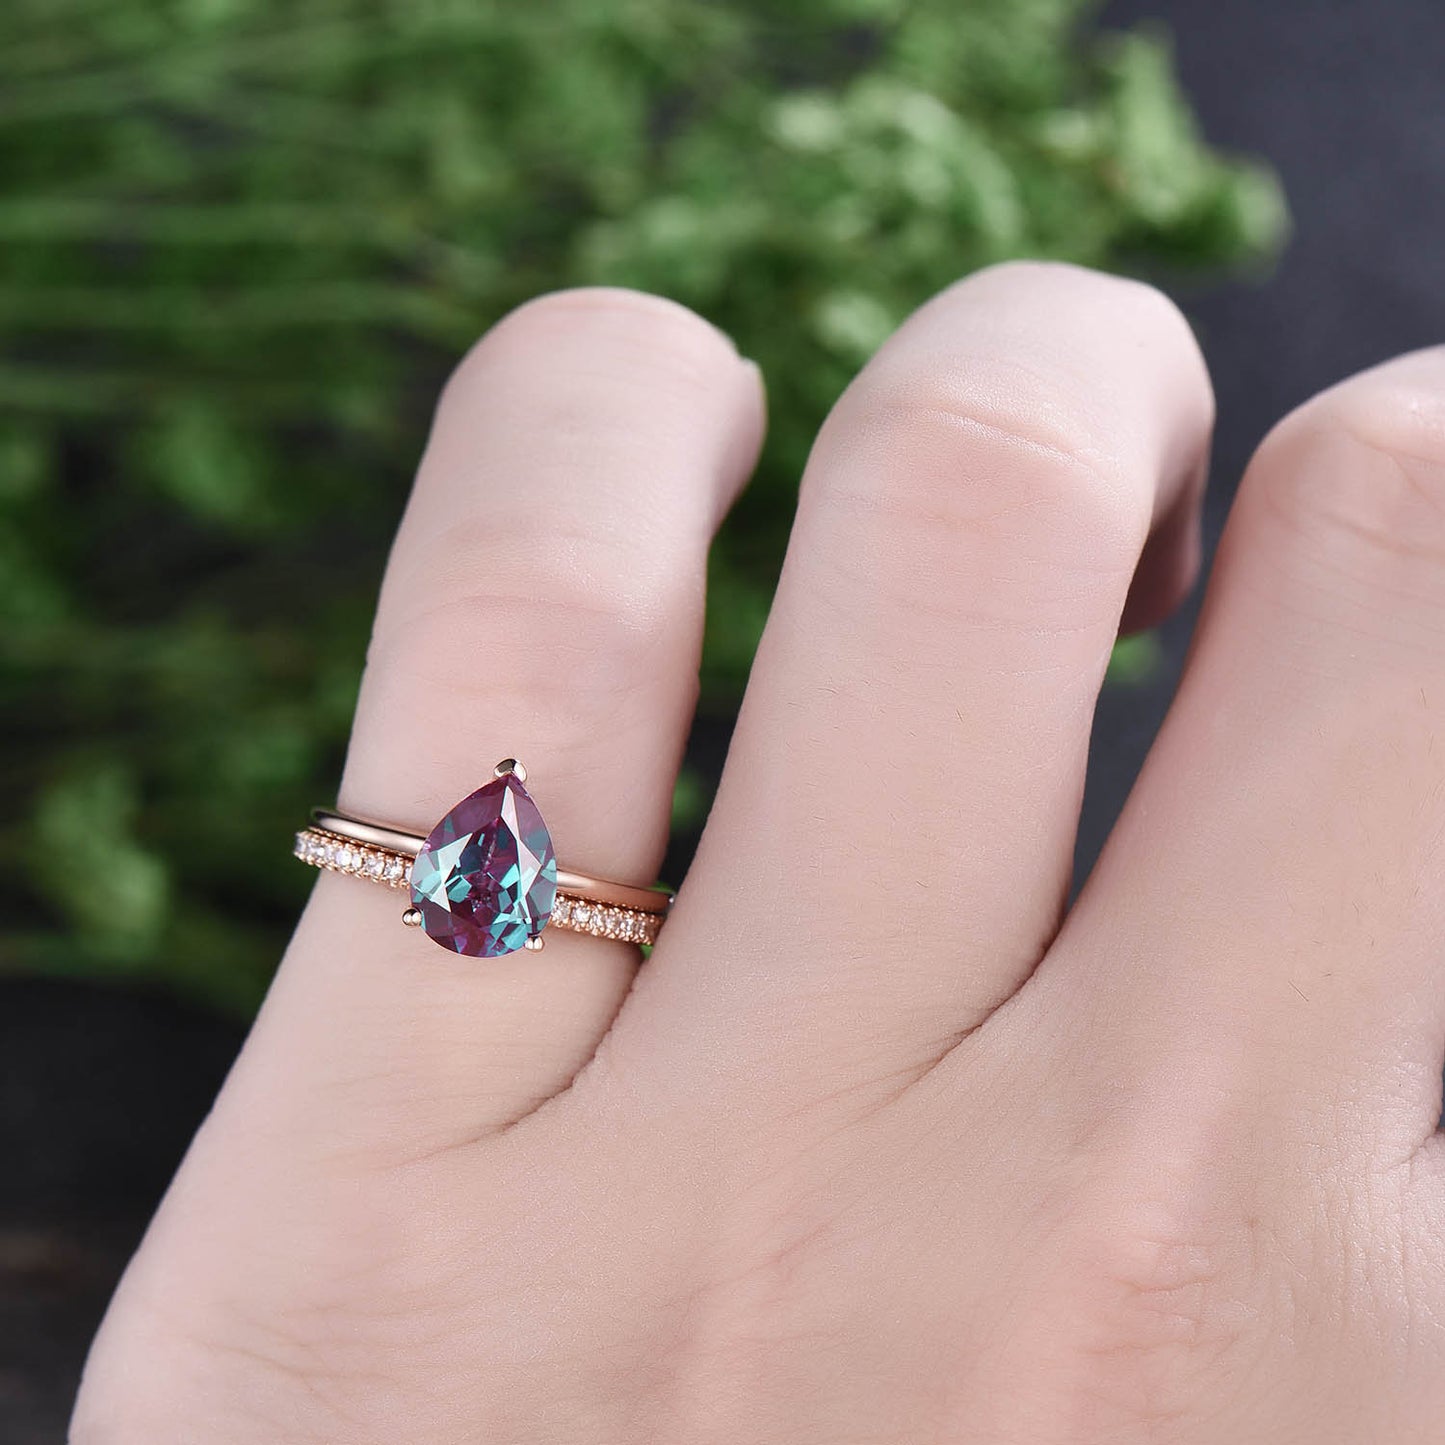 Solid rose gold ring 2ct solitaire alexandrite ring 2pcs color change alexandrite engagement ring set full eternity diamond wedding band